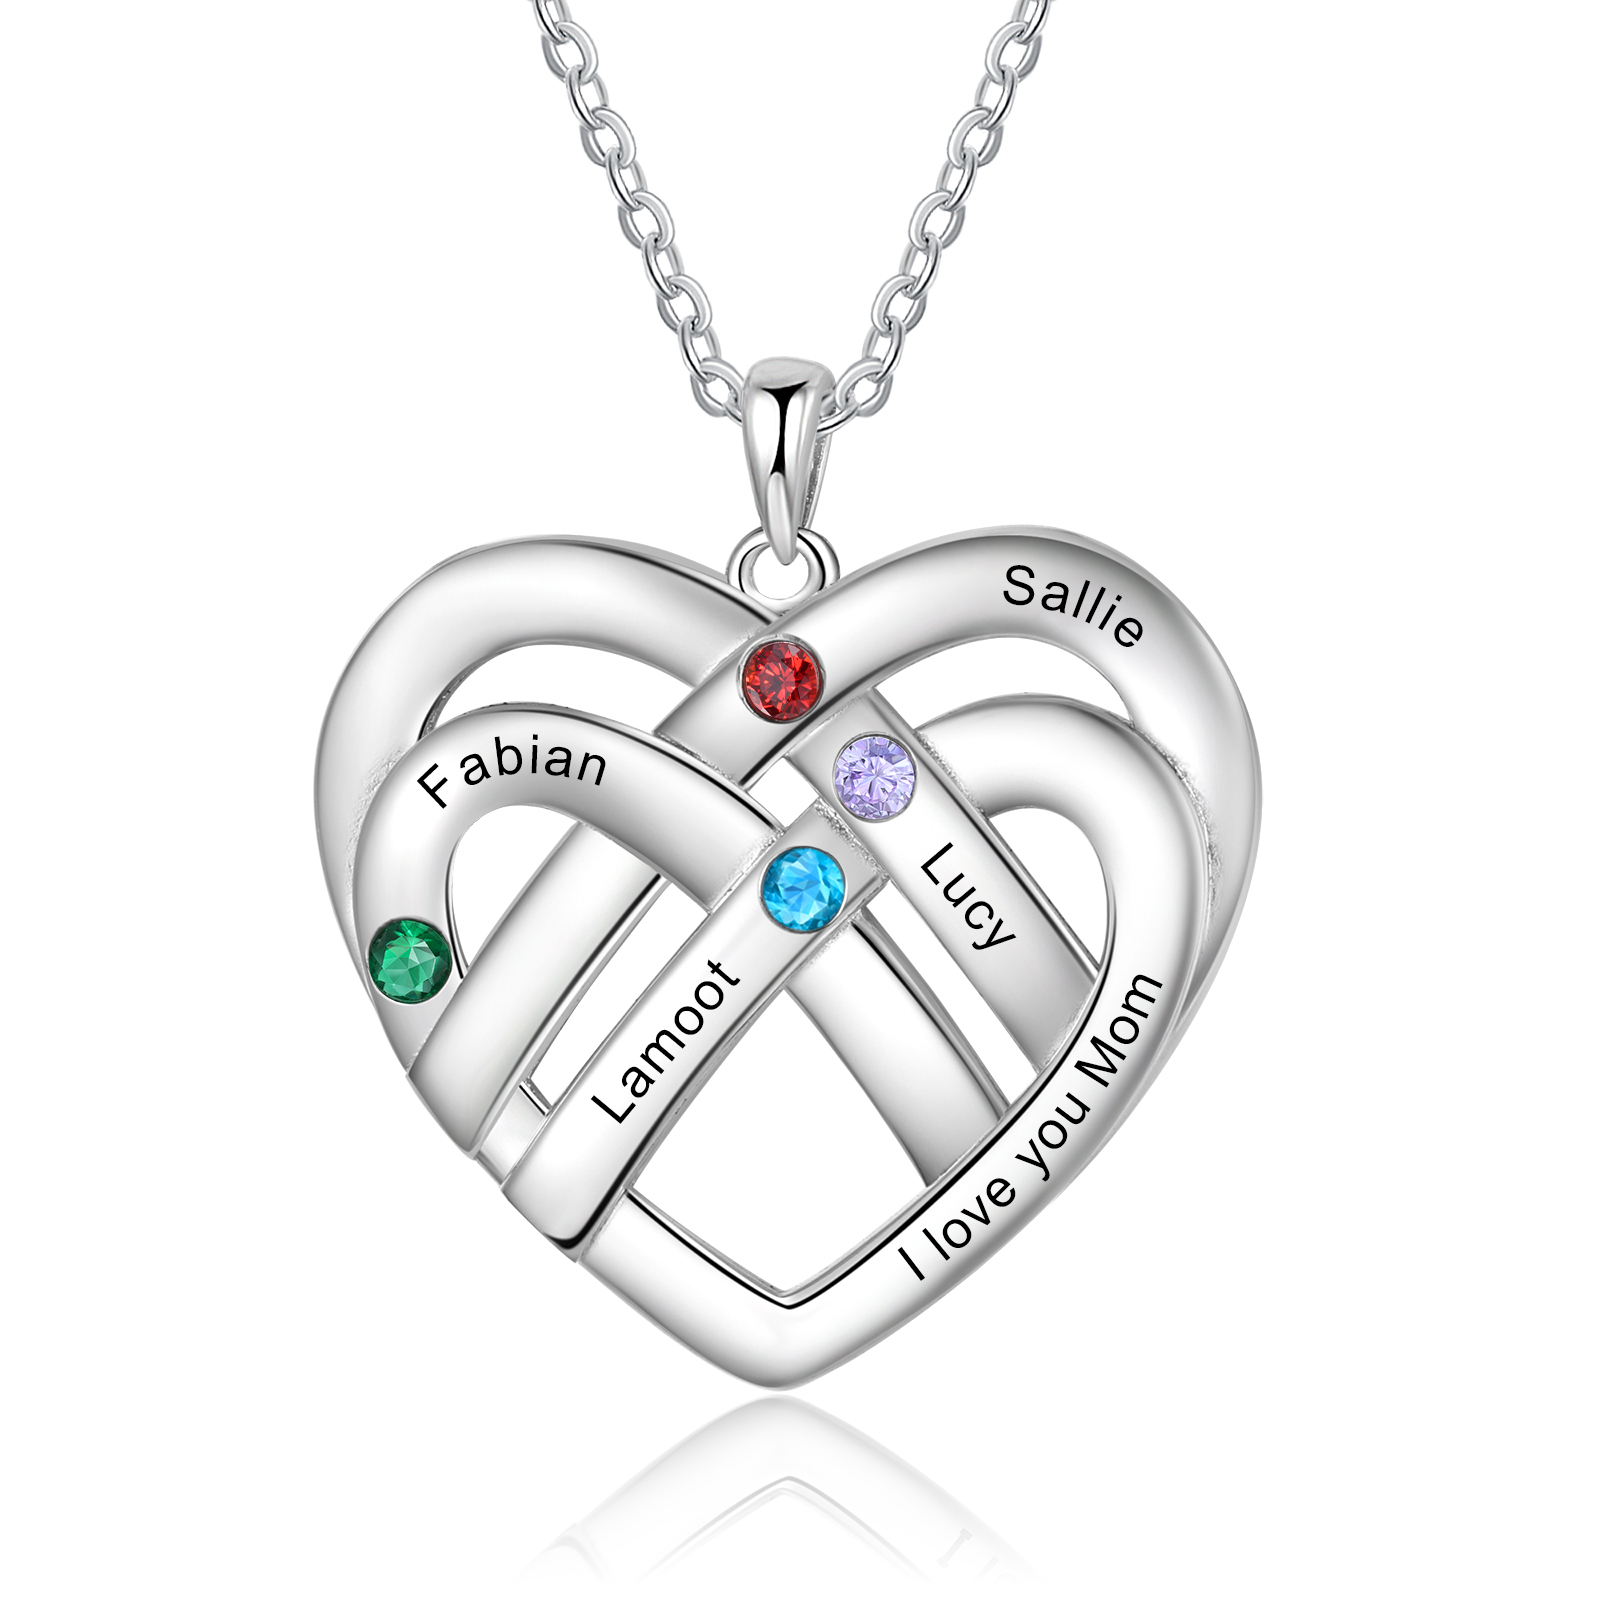 4 Names - Personalized Double Layer Heart Necklace with Custom Name an